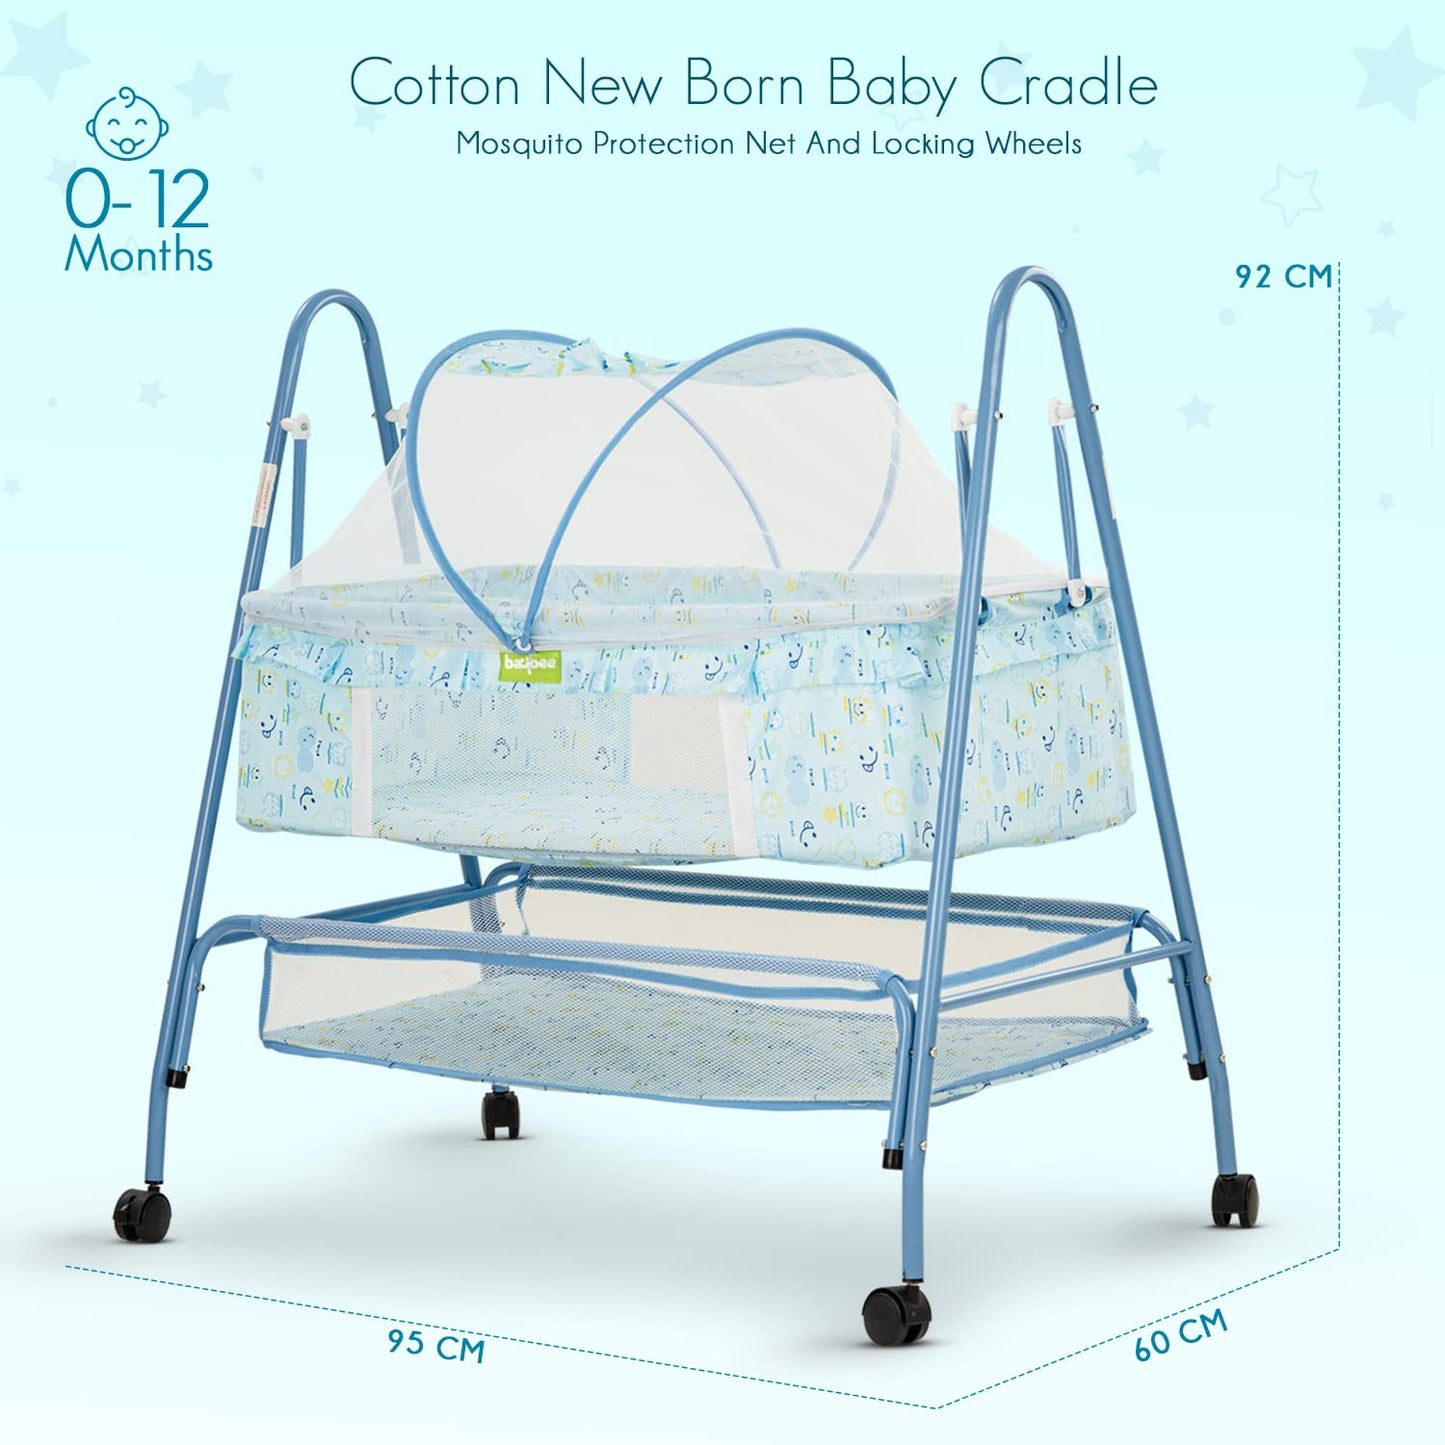 BAYBEE Arise Baby Swing Cradle for Baby with Mosquito Net, Palna Jhula for Baby